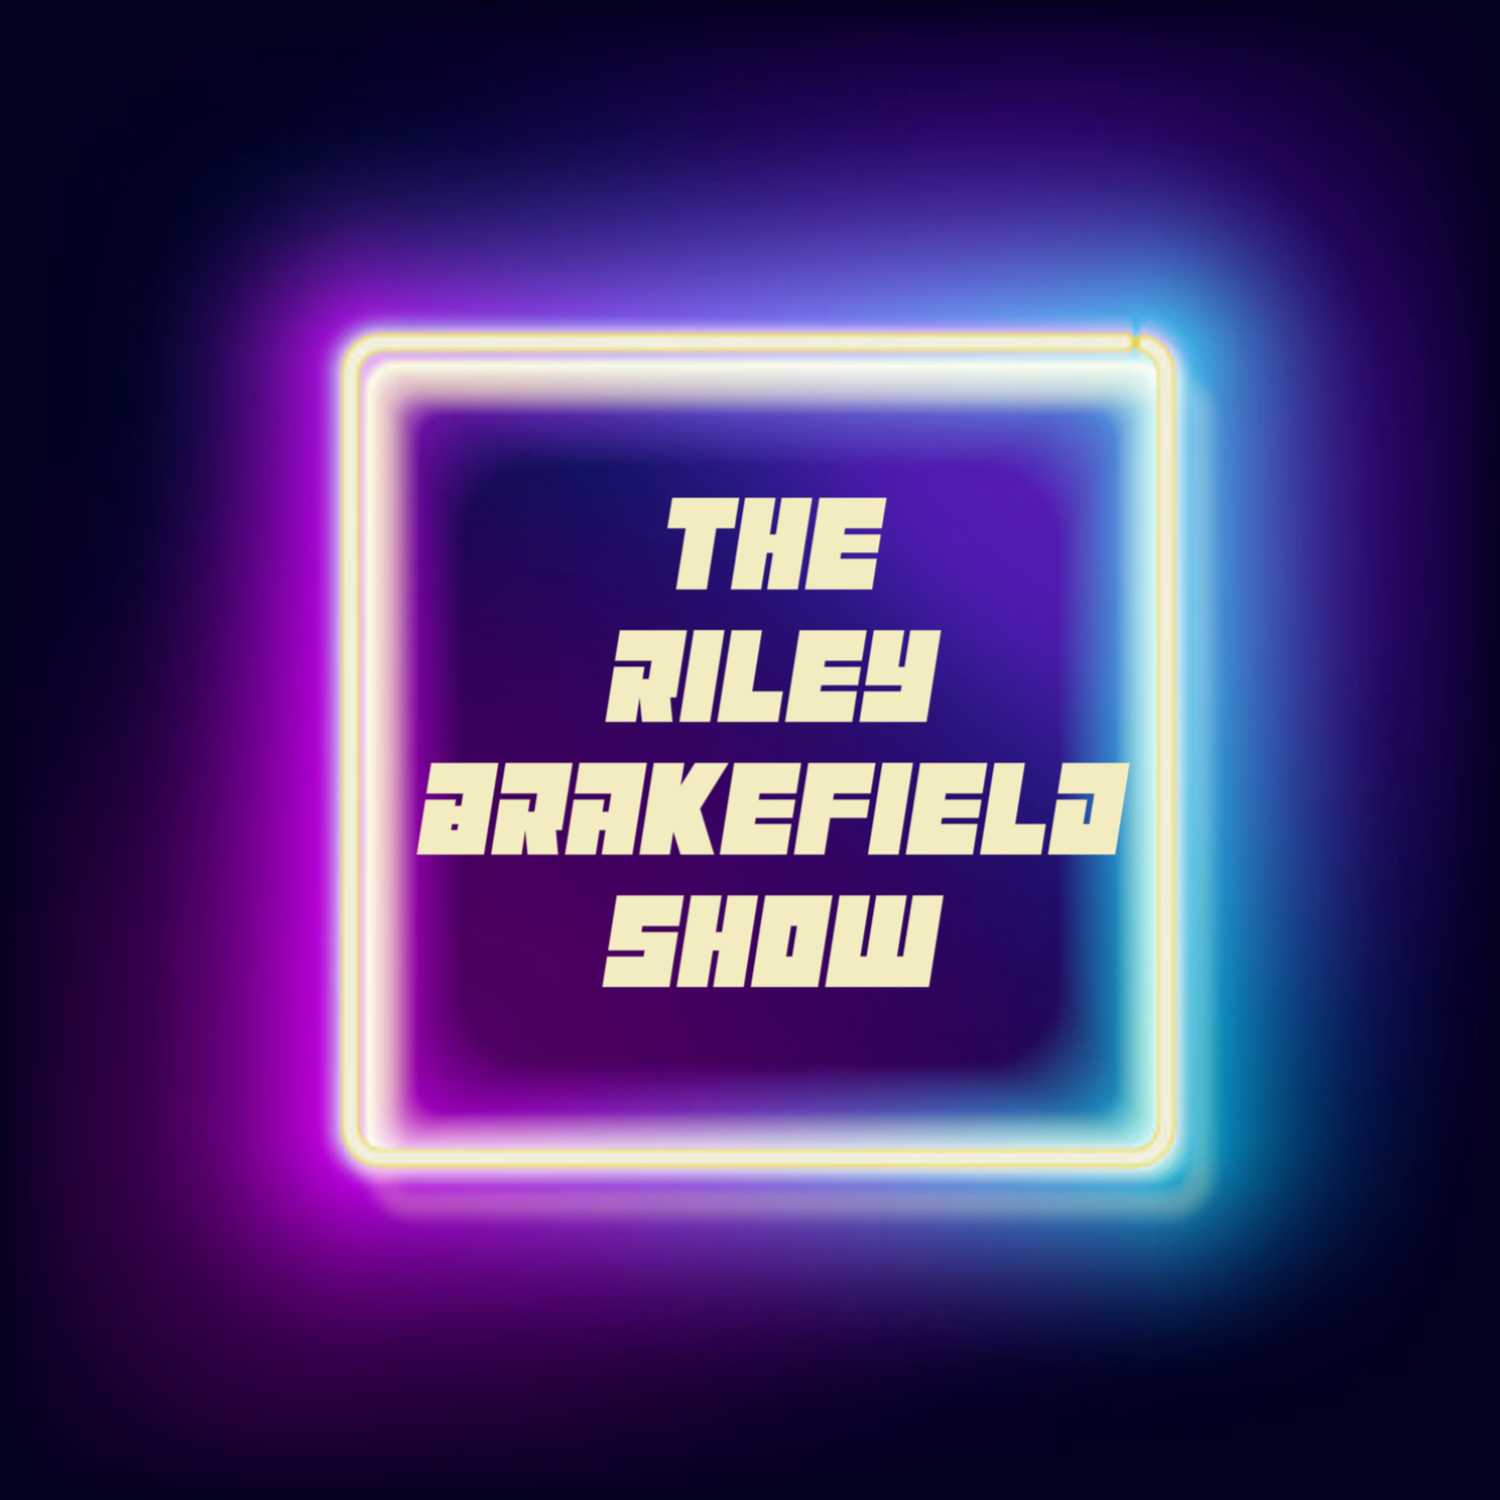 THE RILEY BRAKEFIELD SHOW